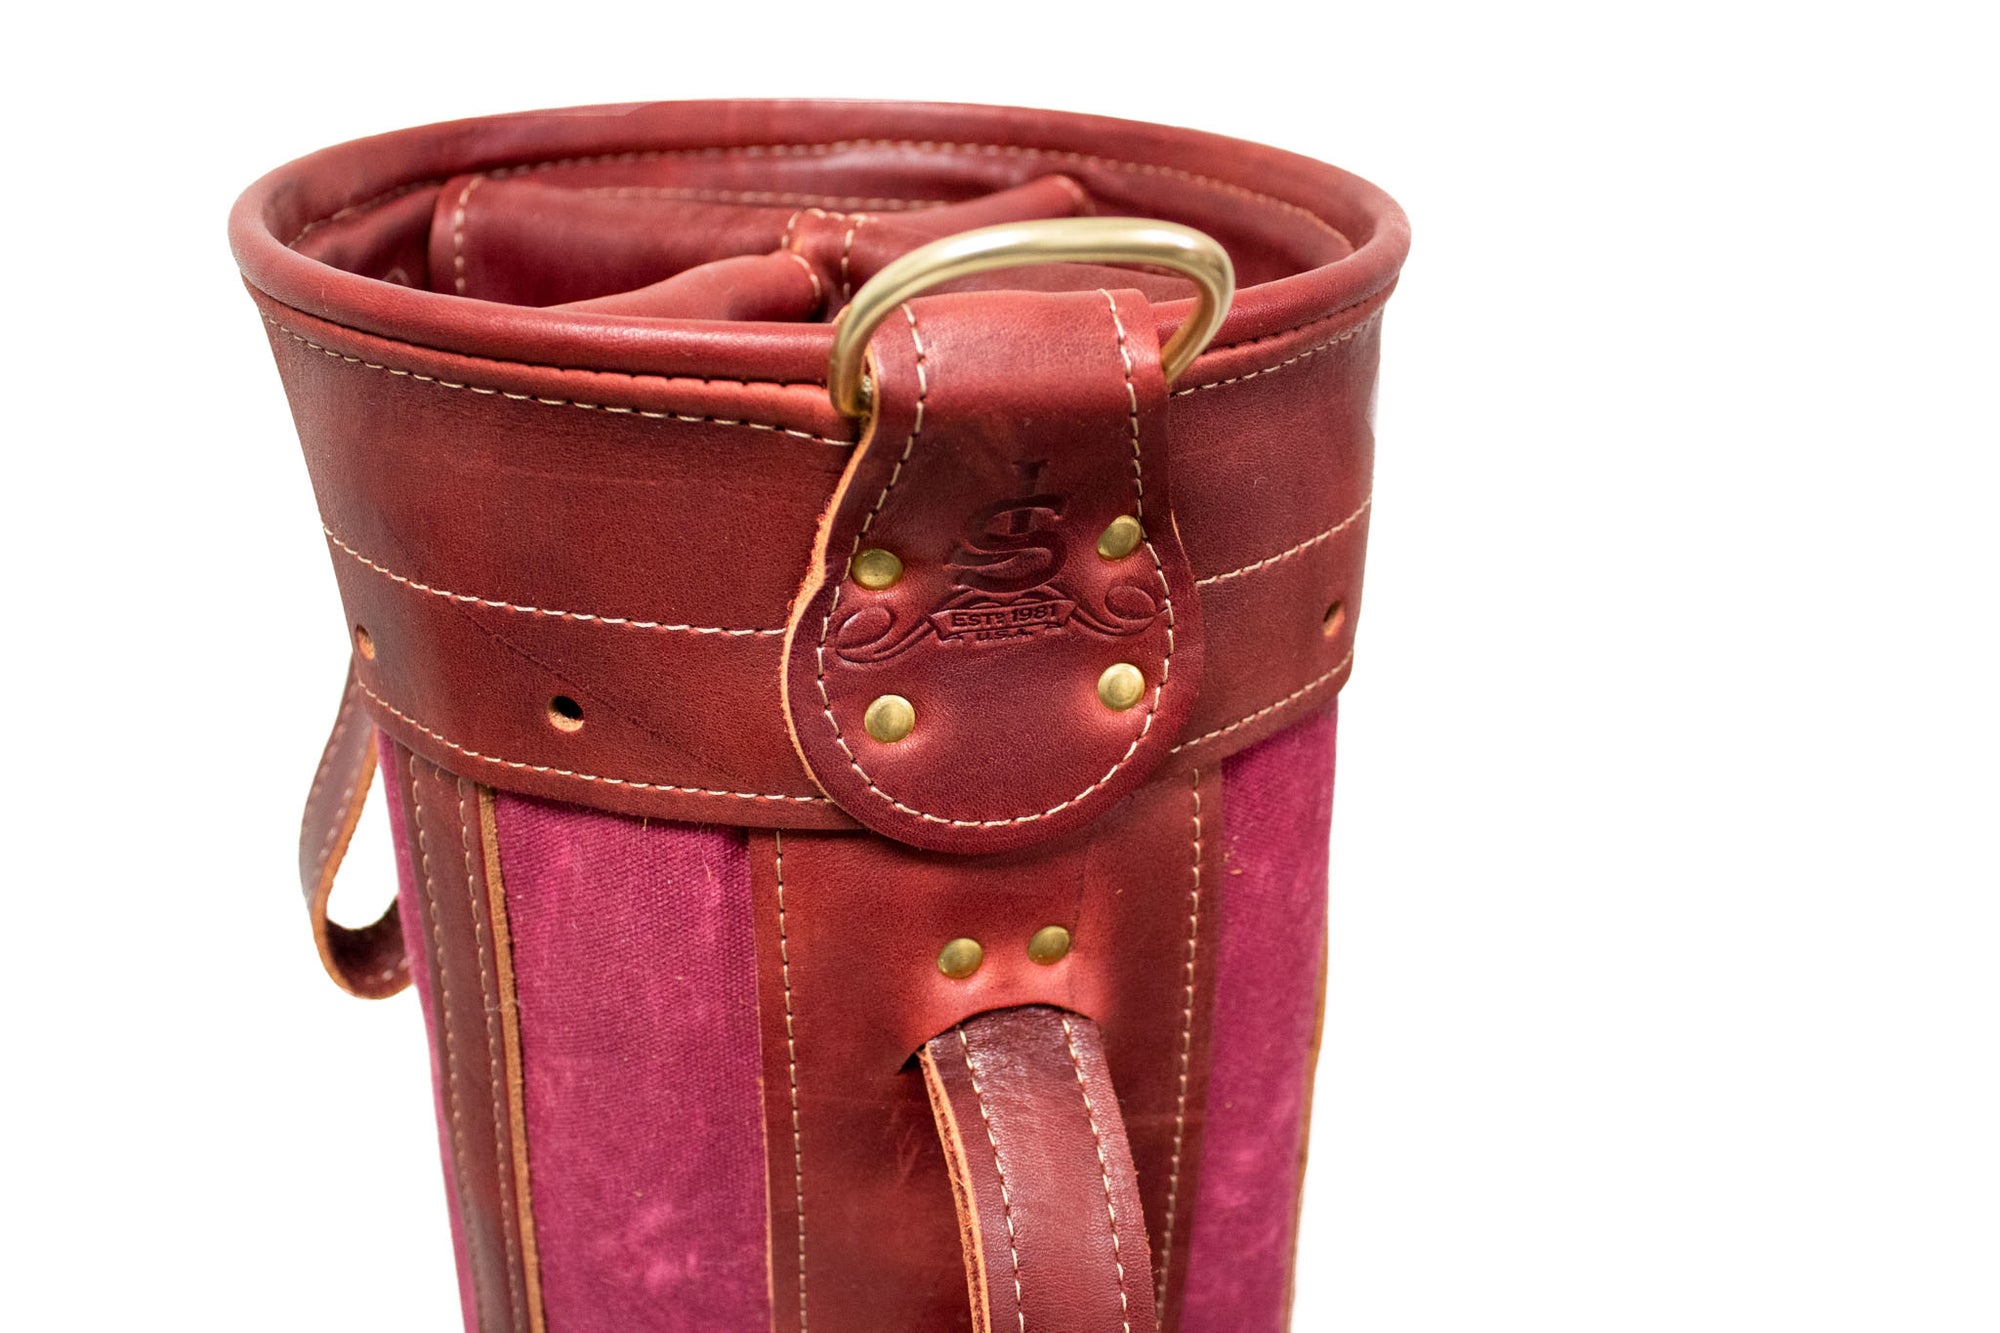 Burgundy Waxed Canvas with Burgundy Leather Staff Bag- Steurer & Jacoby